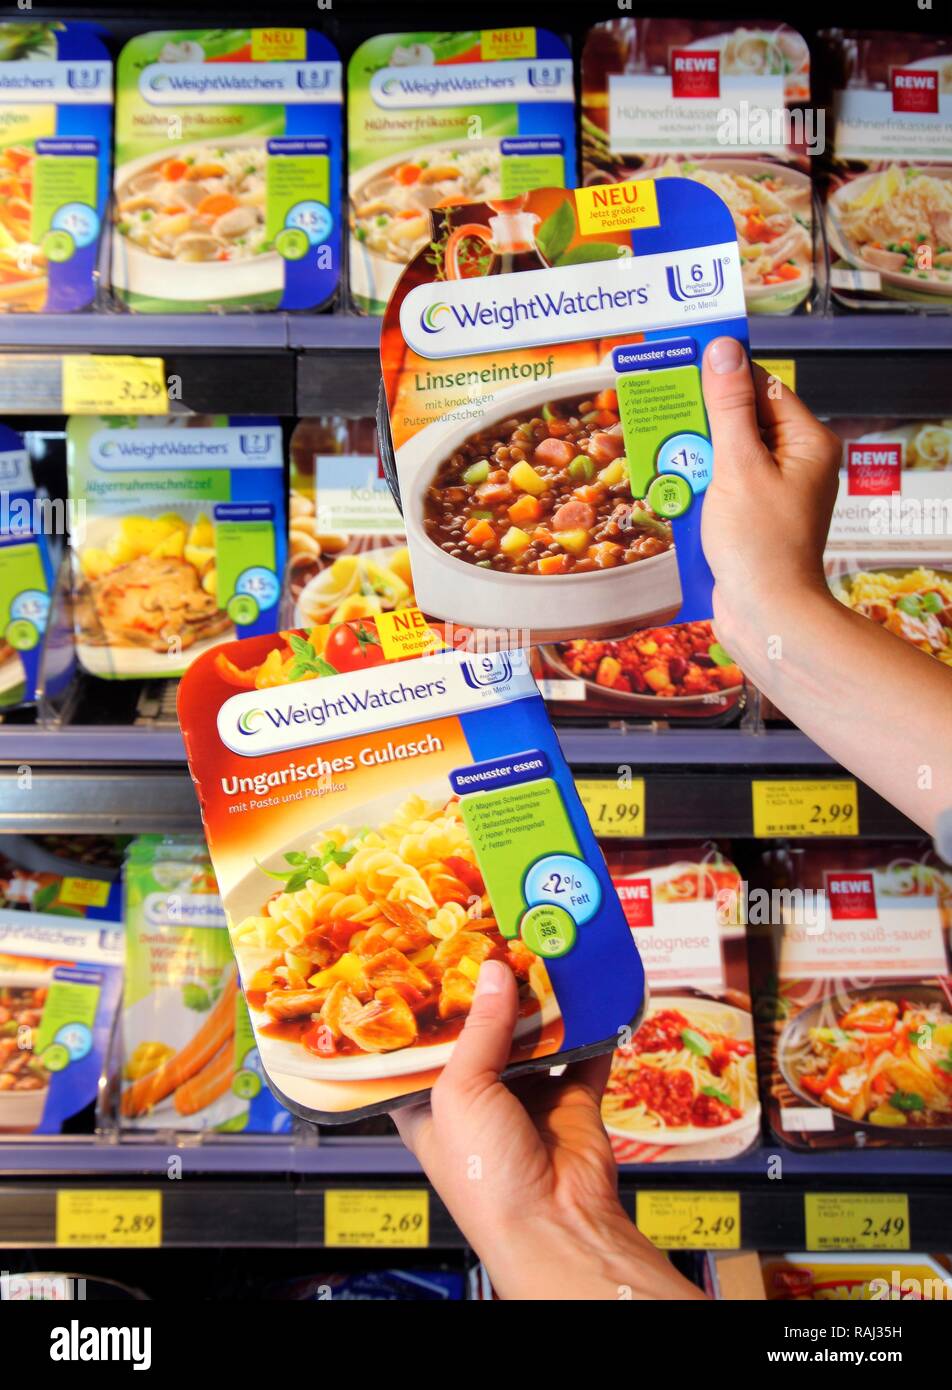 Pre-cooked Weight Watchers dishes, food hall, supermarket Stock Photo